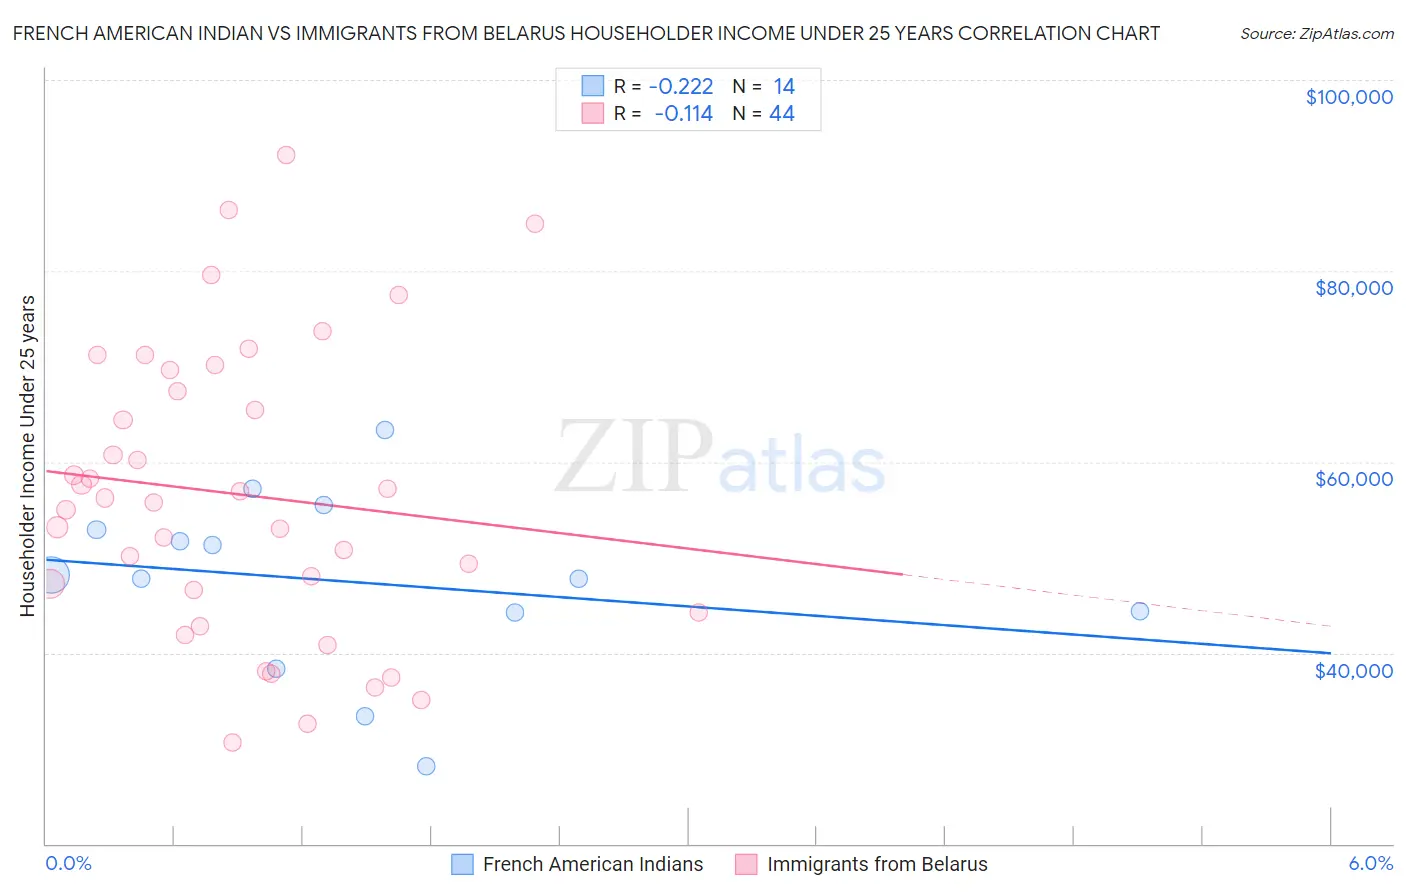 French American Indian vs Immigrants from Belarus Householder Income Under 25 years